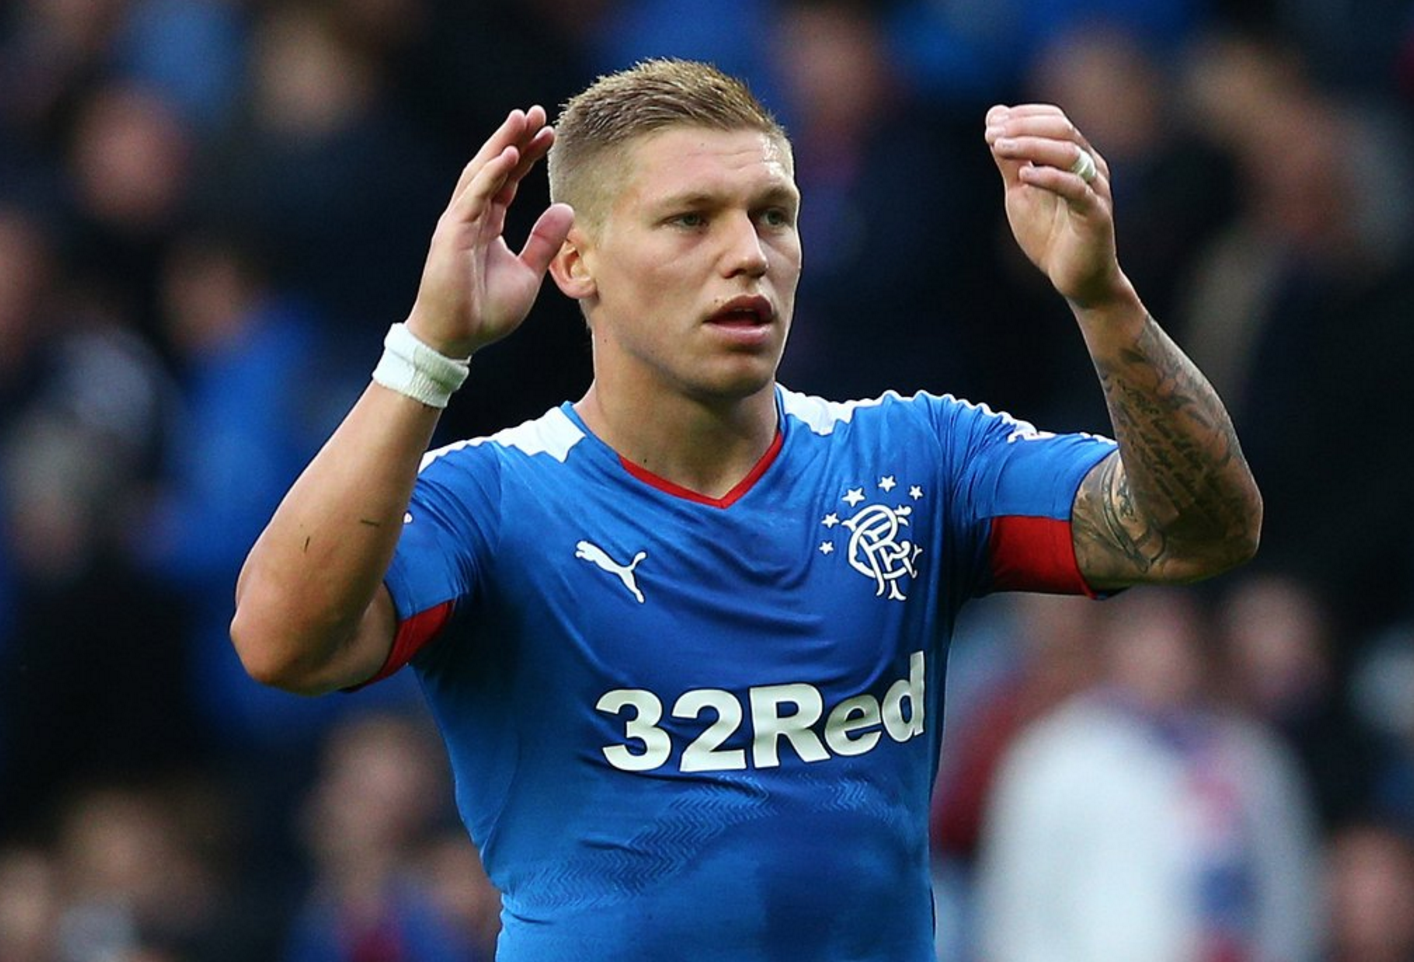 Rangers star confirms contract talks ‘ongoing’